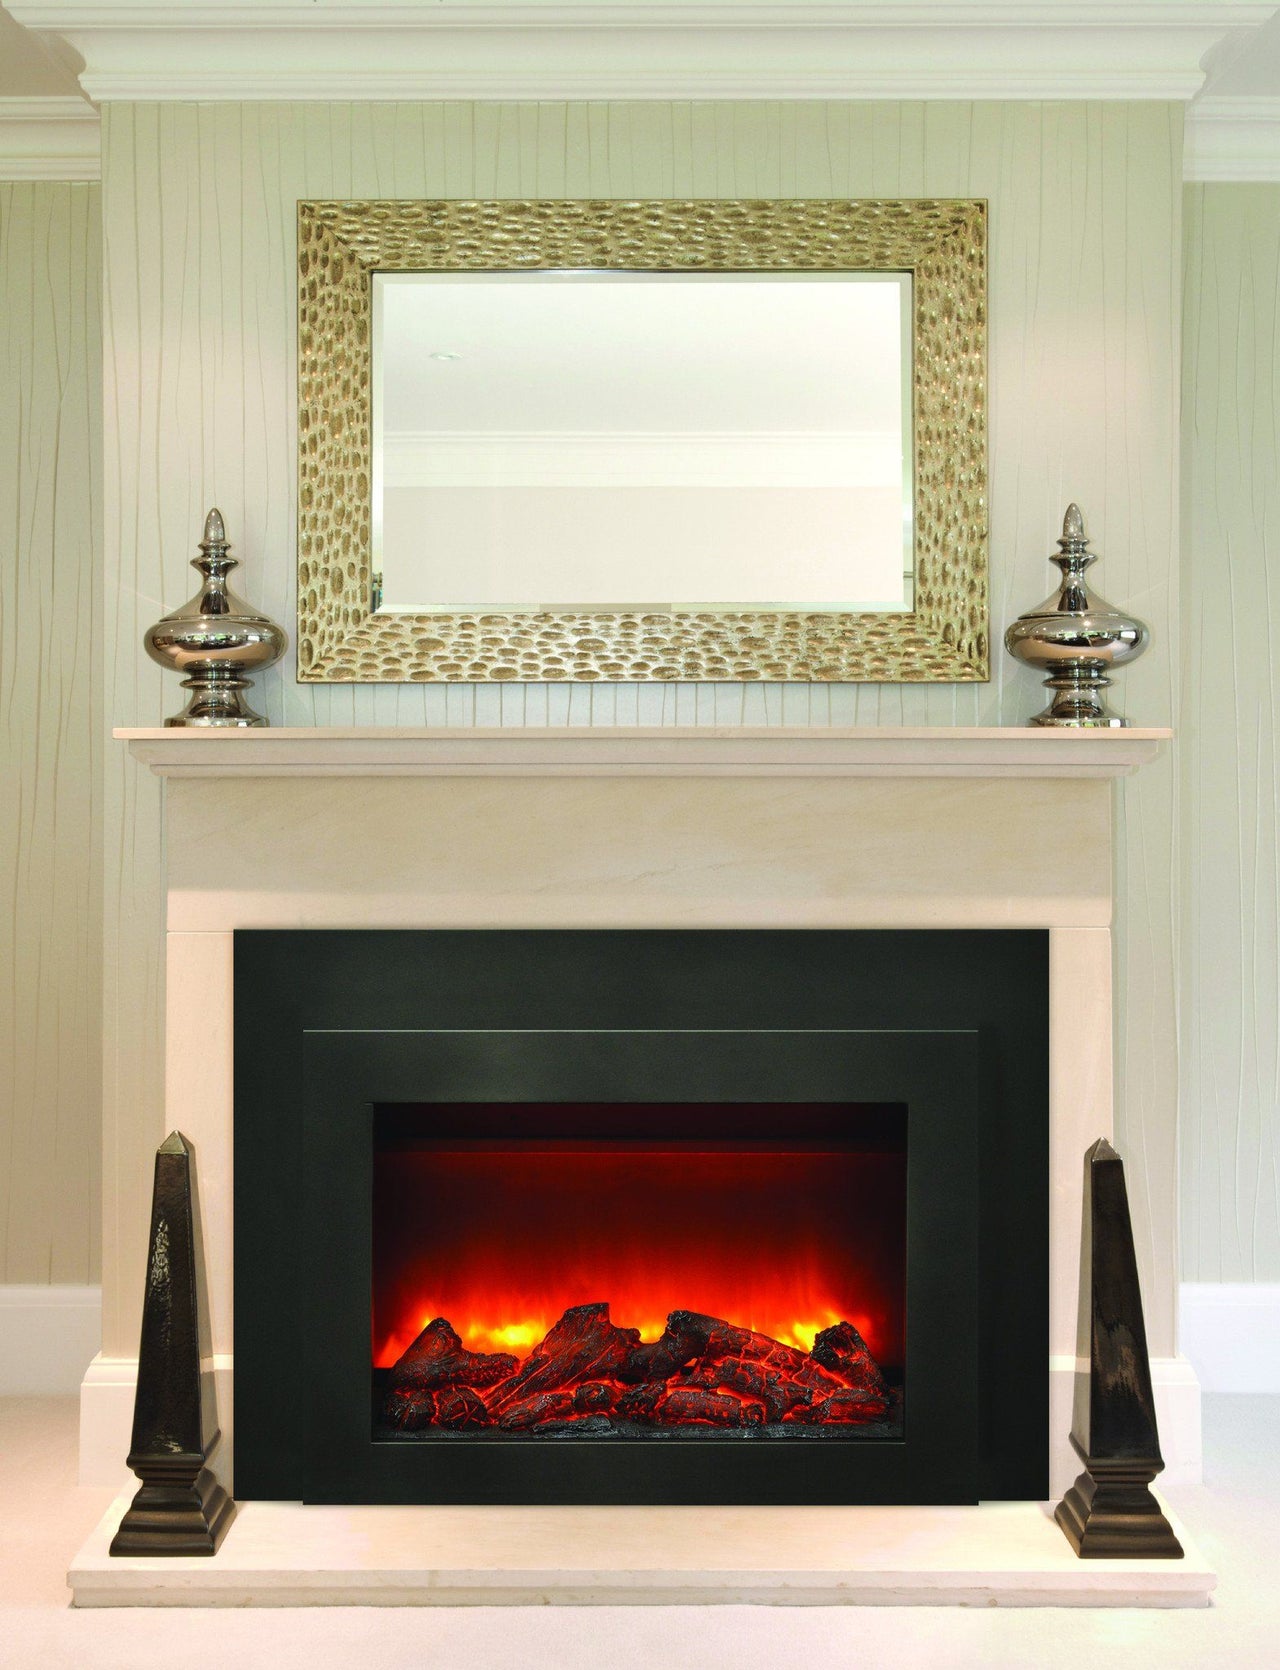 Amantii Deep Insert Electric Fireplace with Black Steel Surround & Overlay Electric Fireplace Amantii 